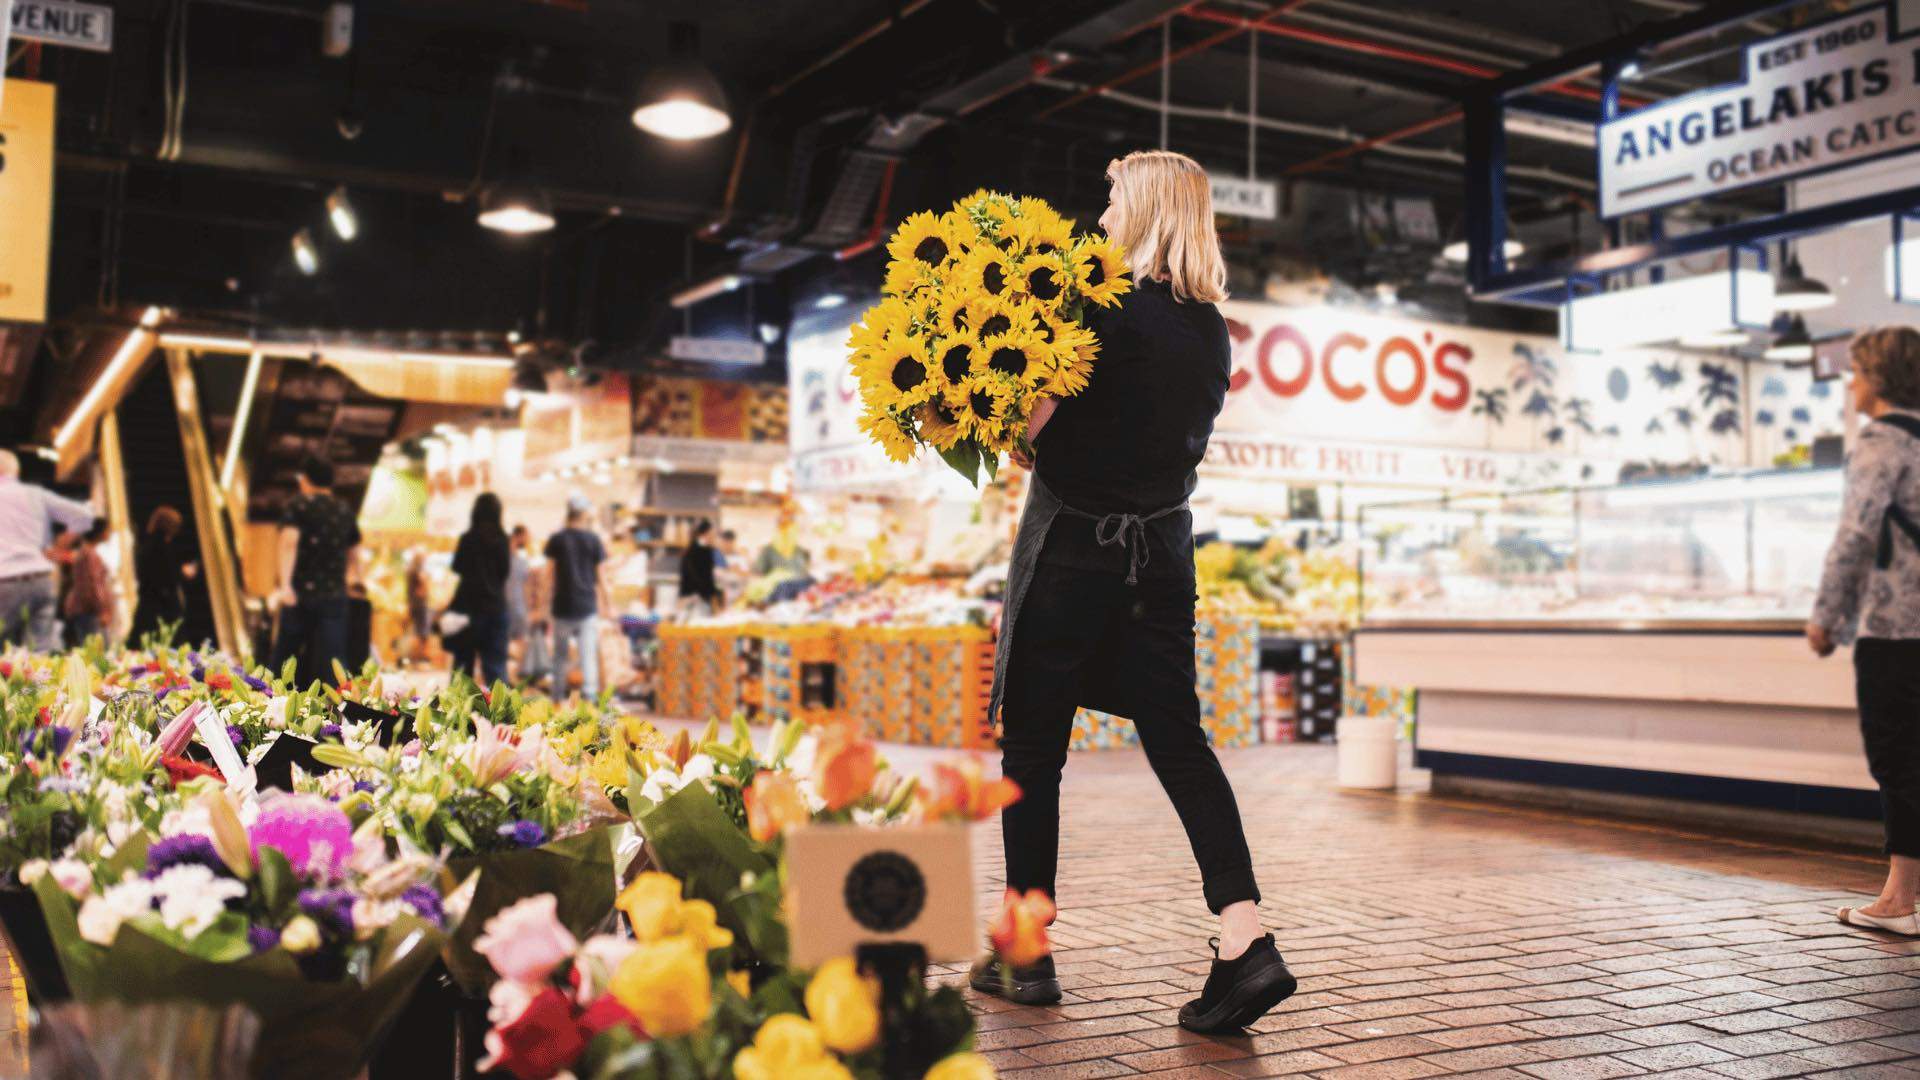 A woman carrying a bouquet of sunflowers in the Adelaide Central Market.